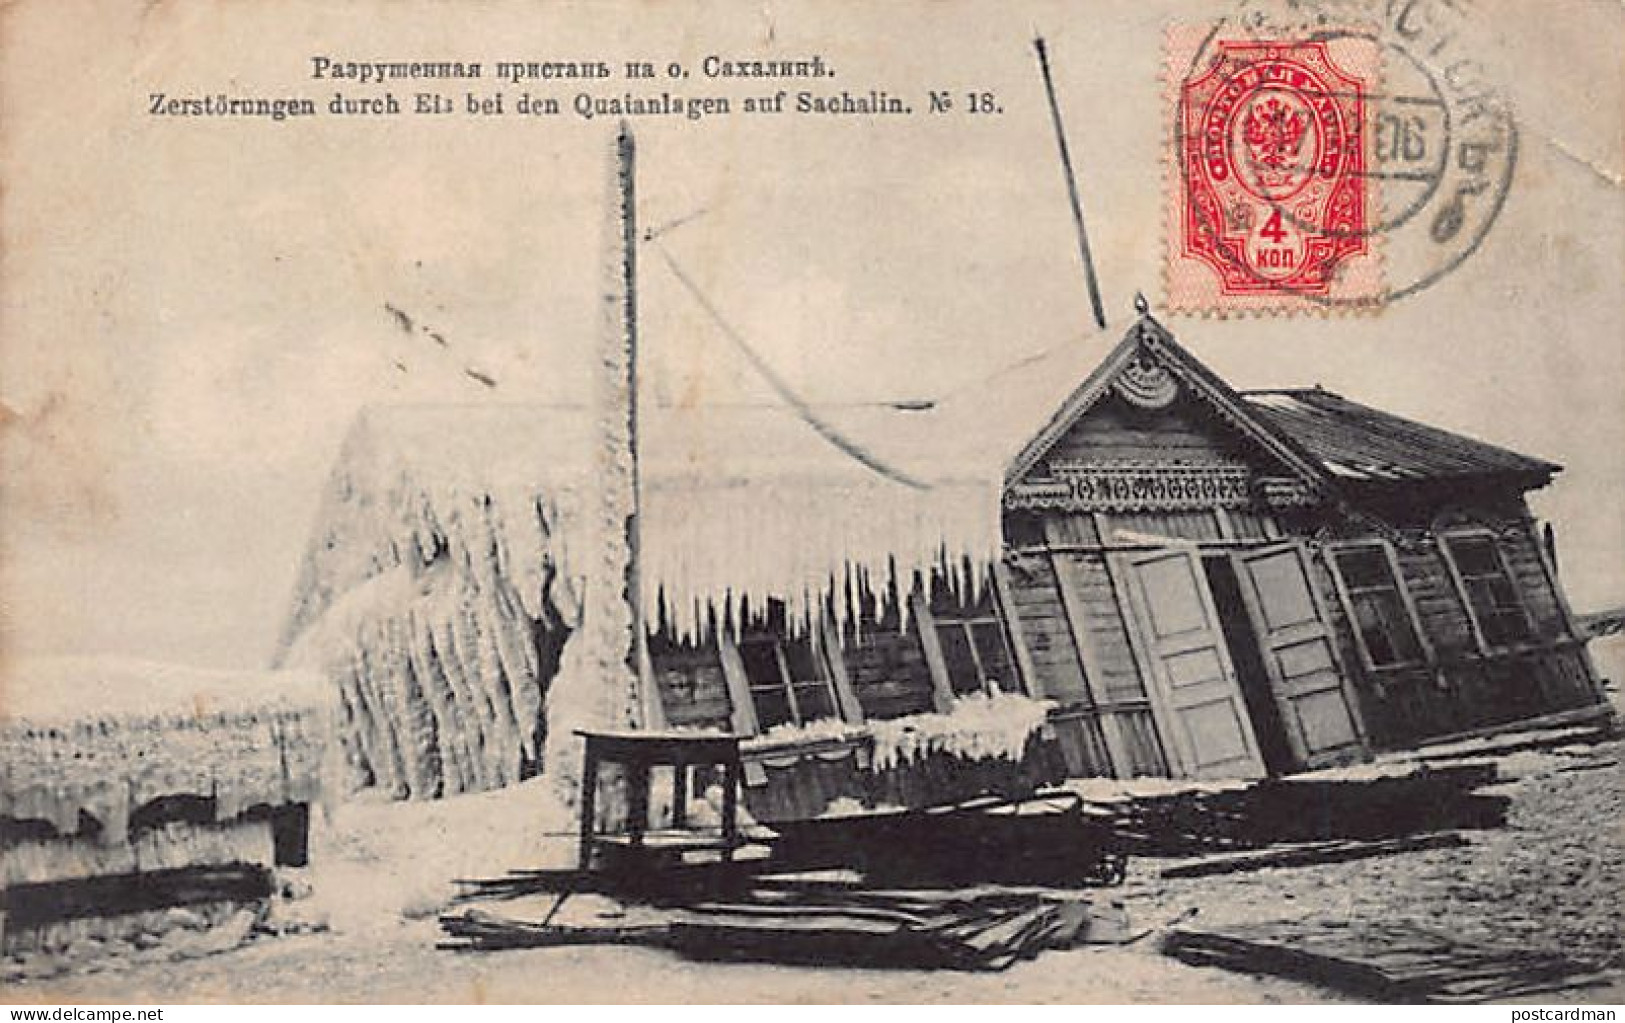 Russia - Sakhalin Islands - Ruined Pier In Winter - Publ. Scherer, Nabholz And Co. 18 - Russland